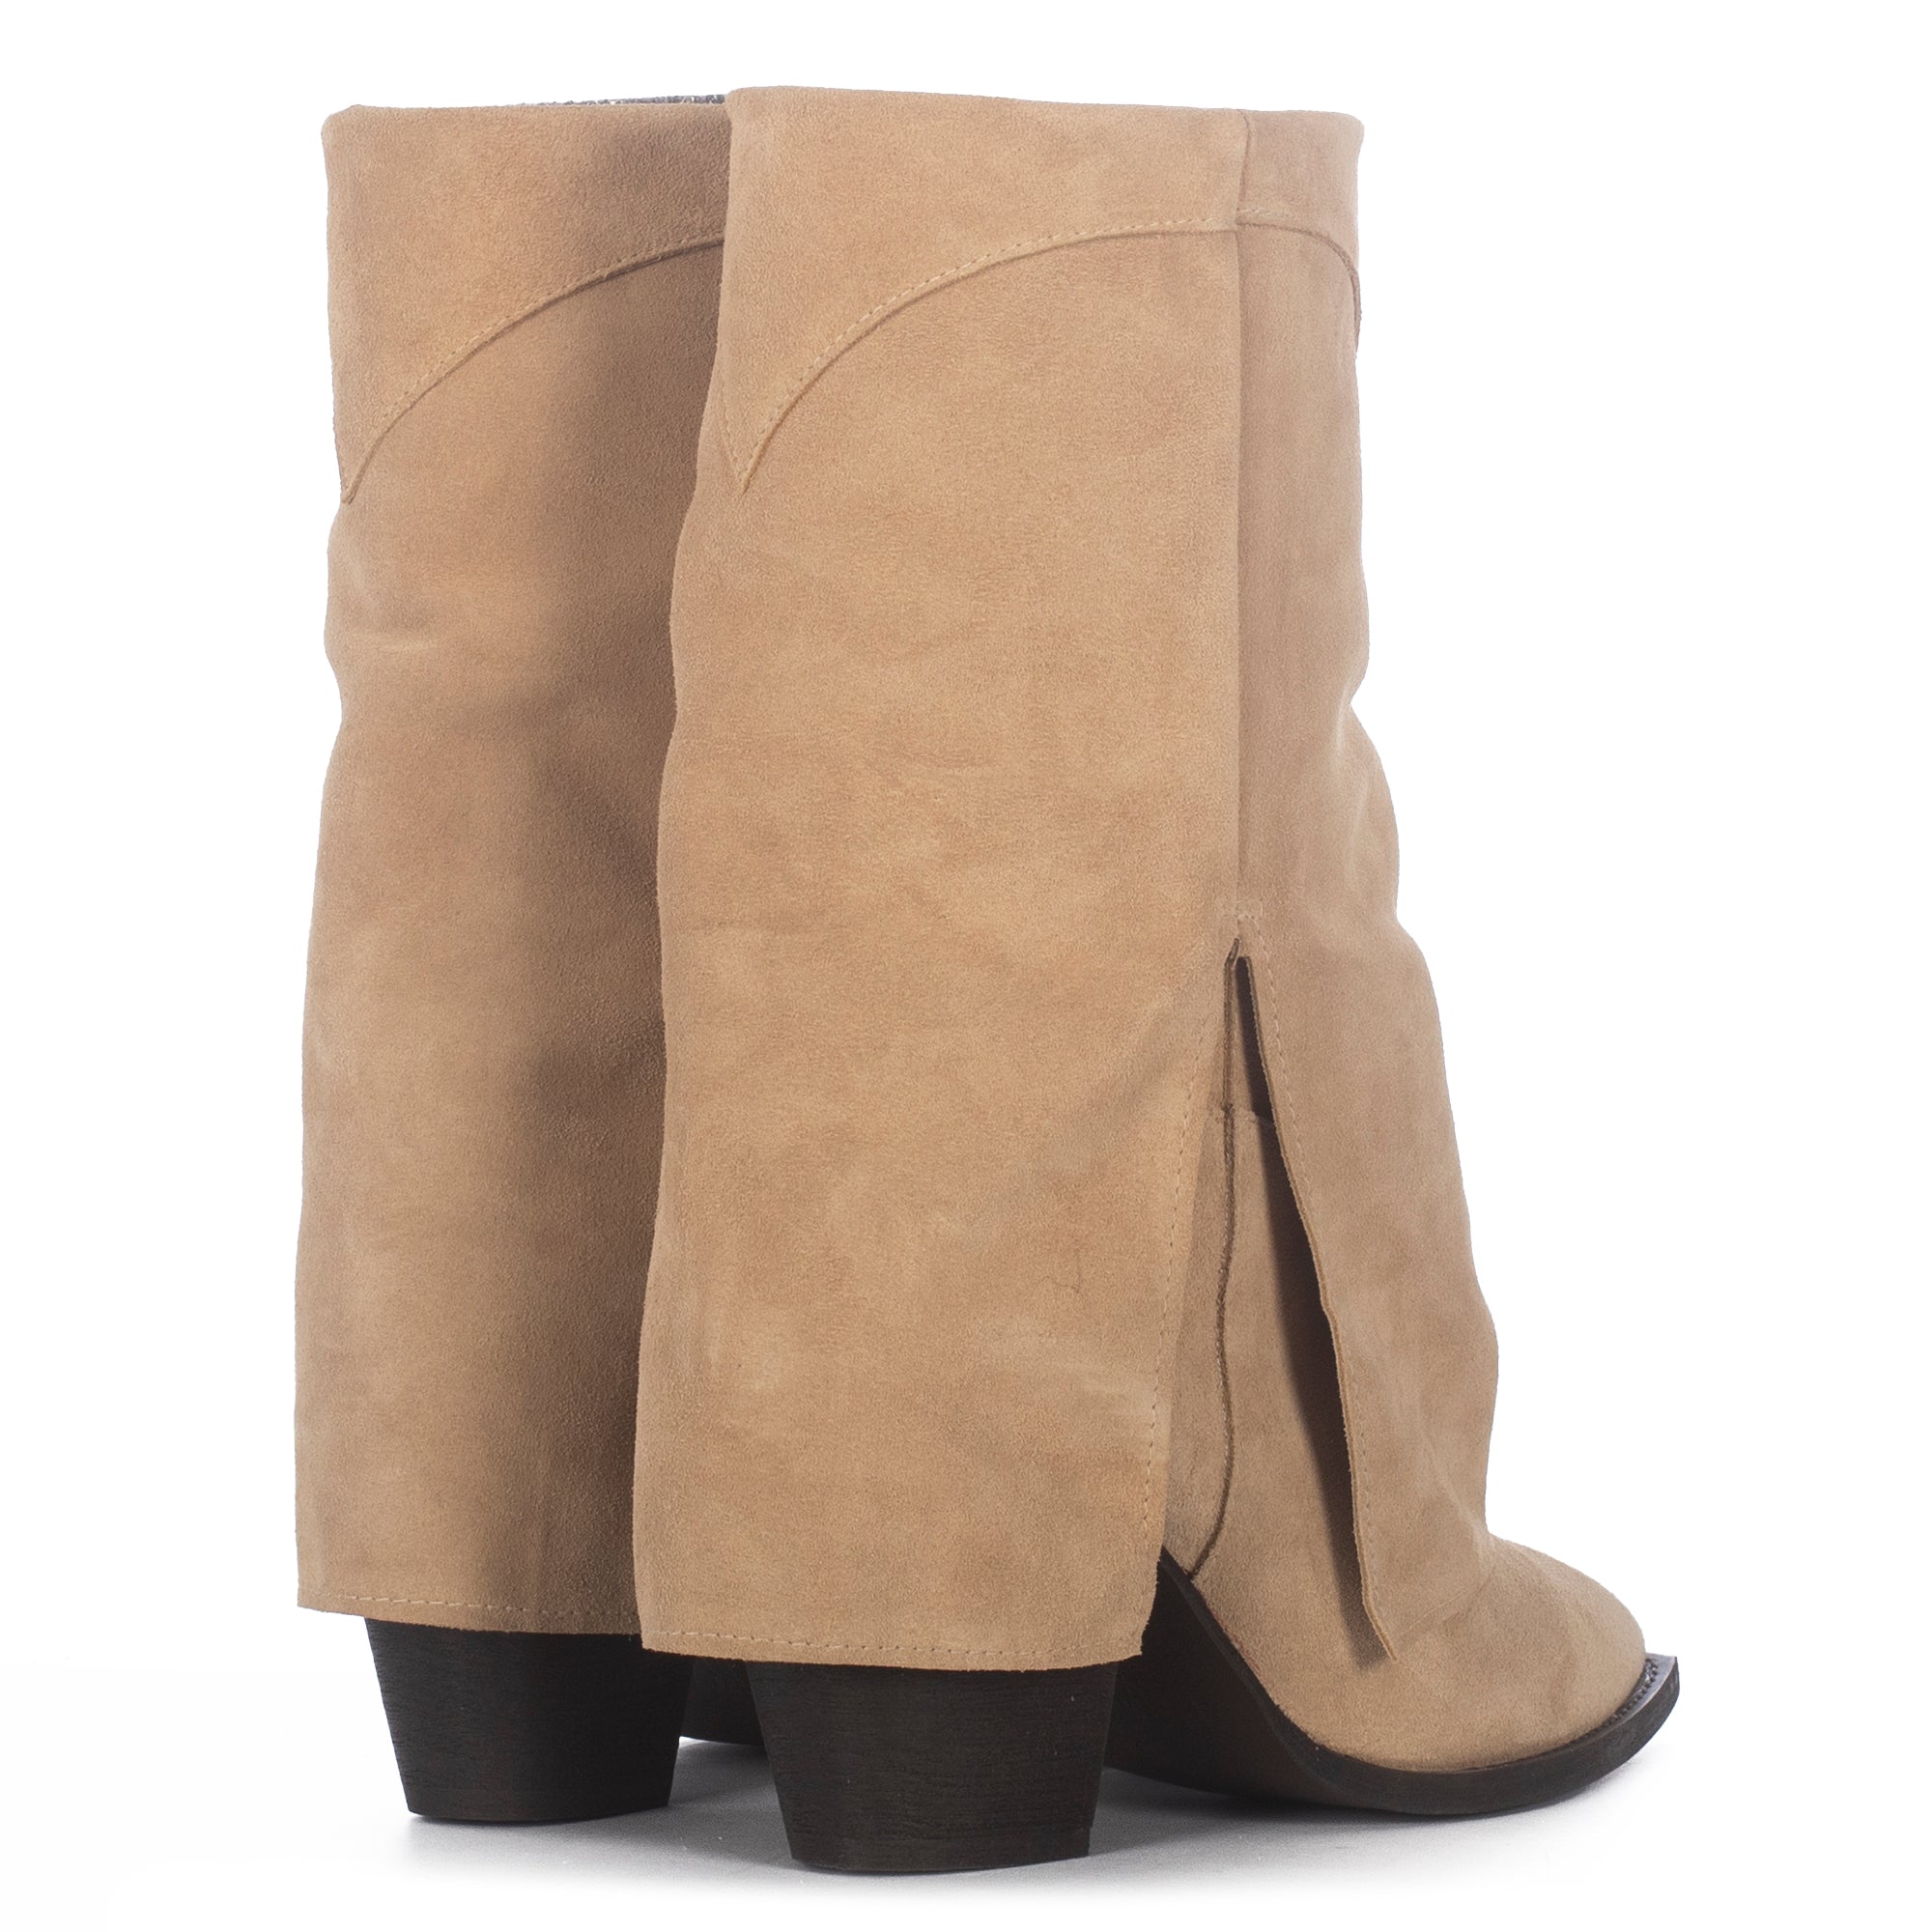 VEGAS SAND SUEDE BOOTS